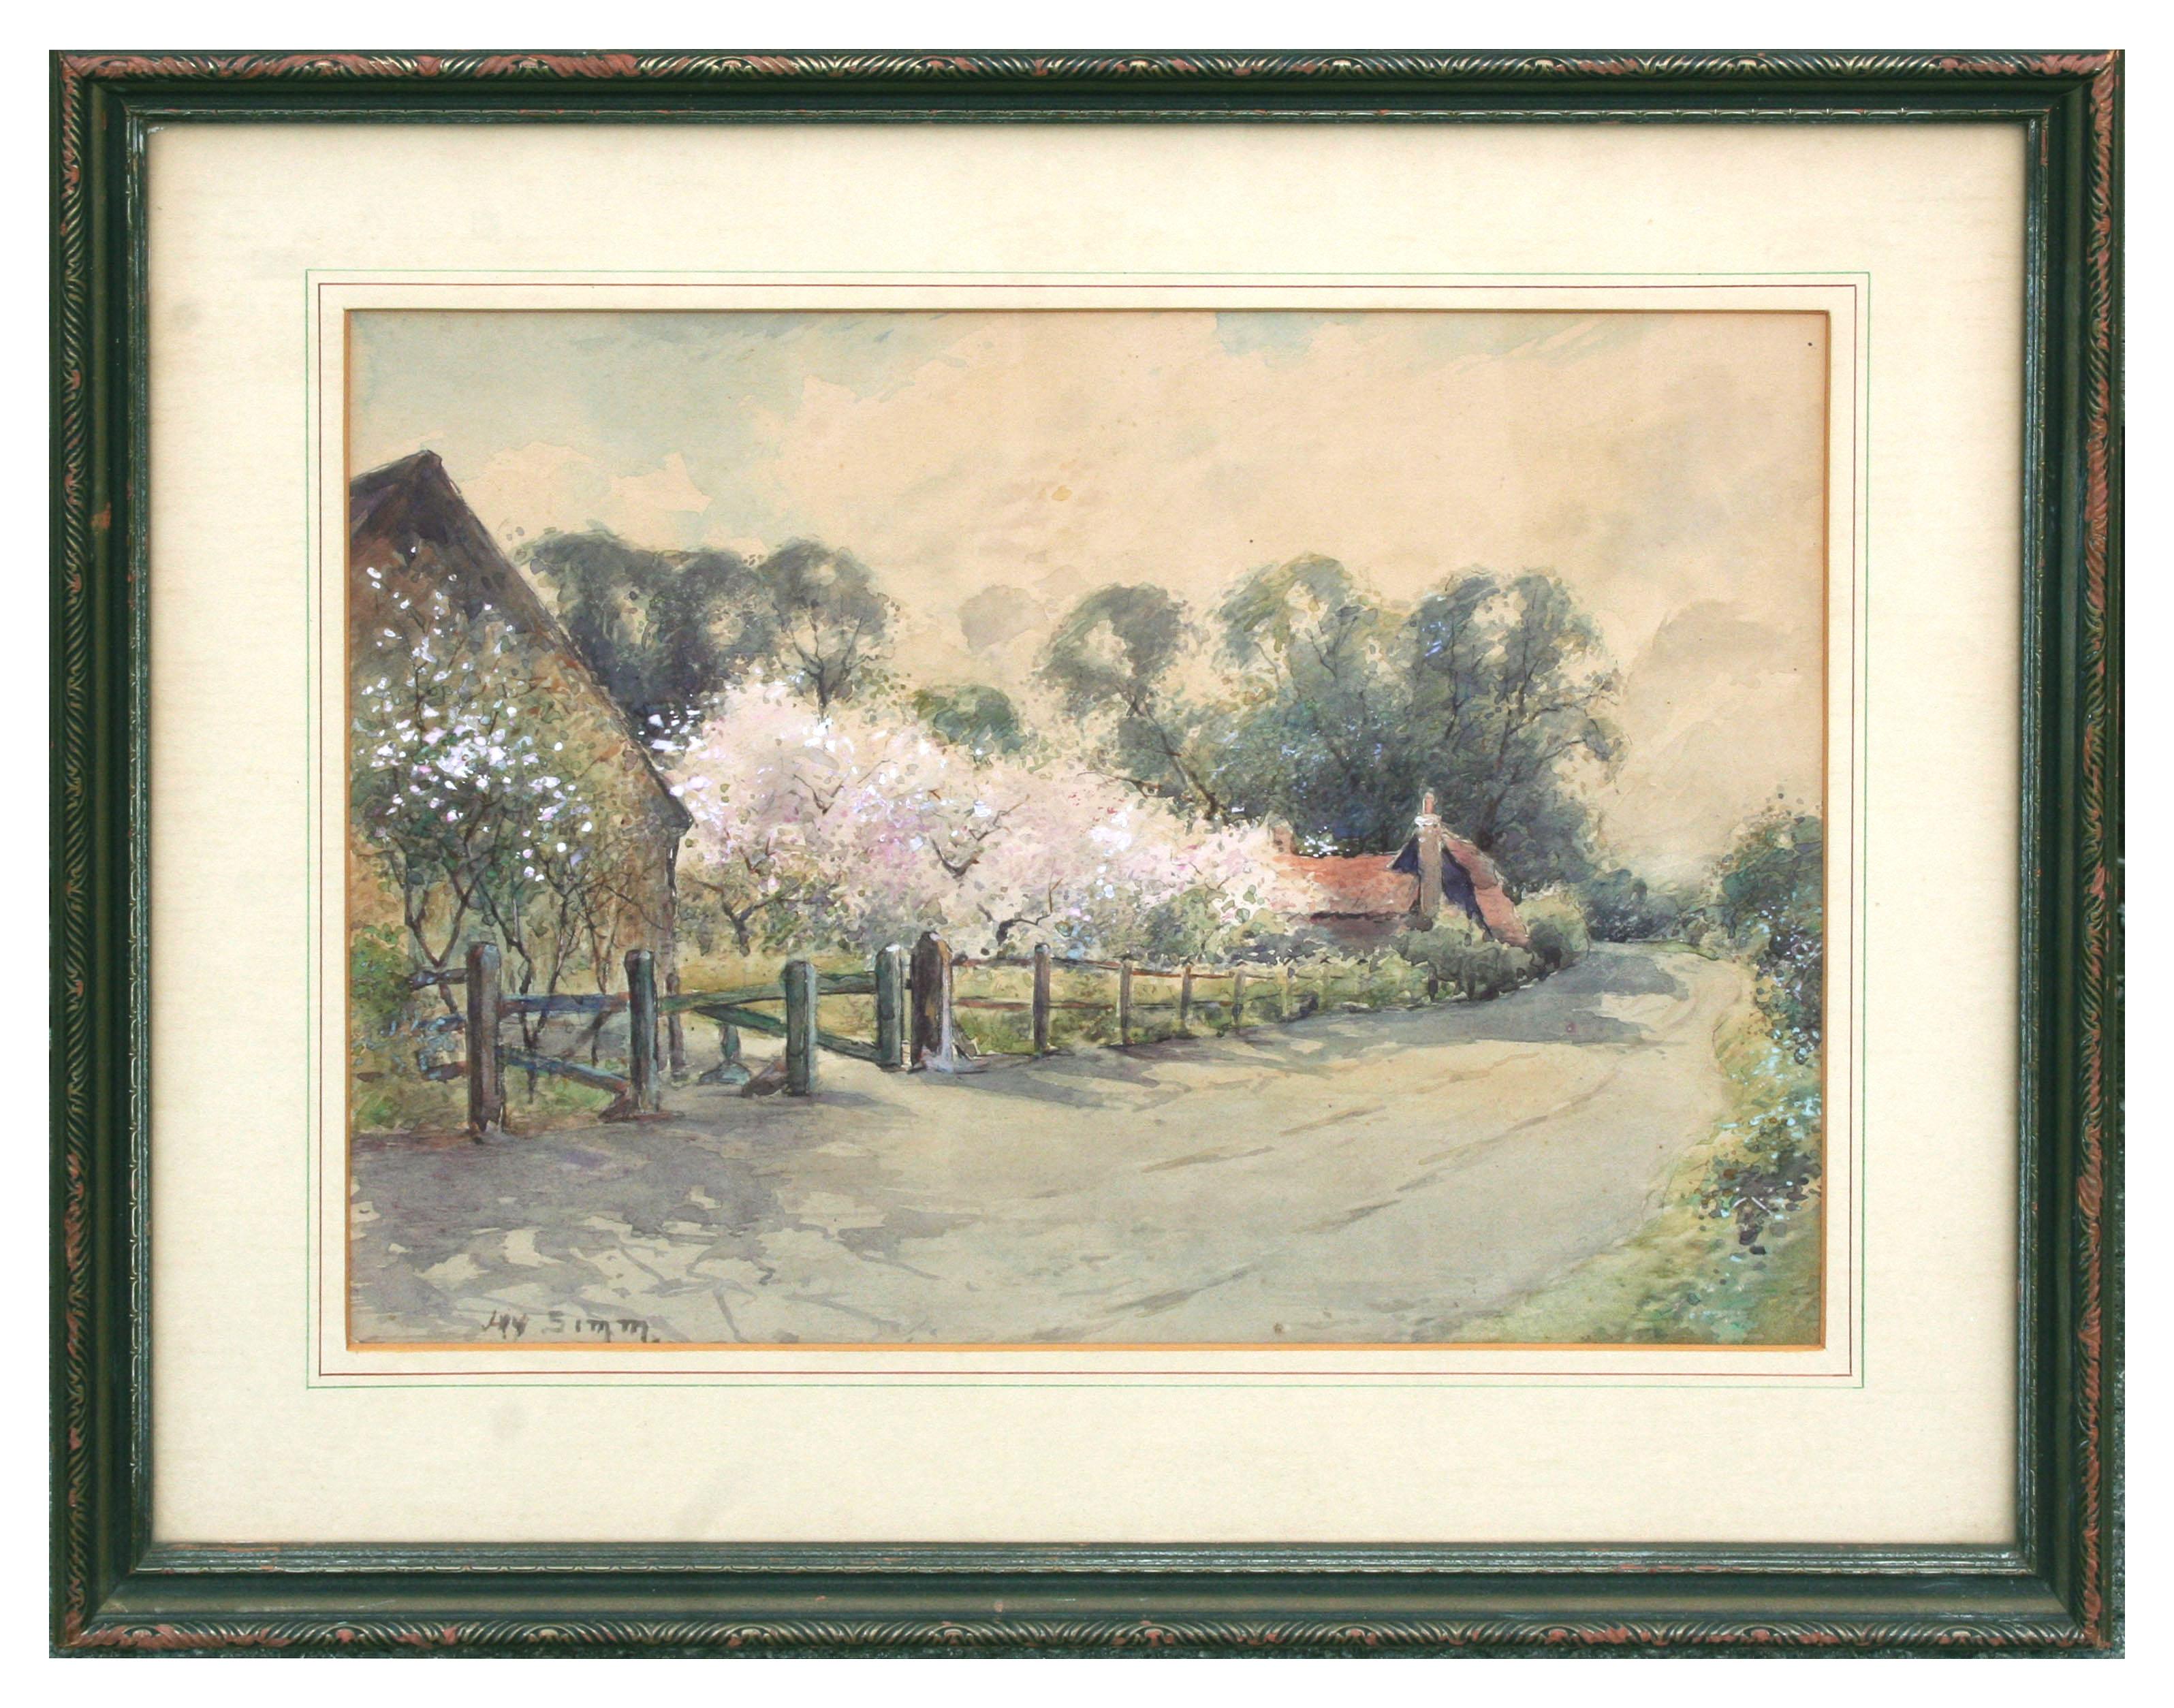 Orchard in Bloom, Mid Century Spring Blossoms Landscape Watercolor by Jay Simm